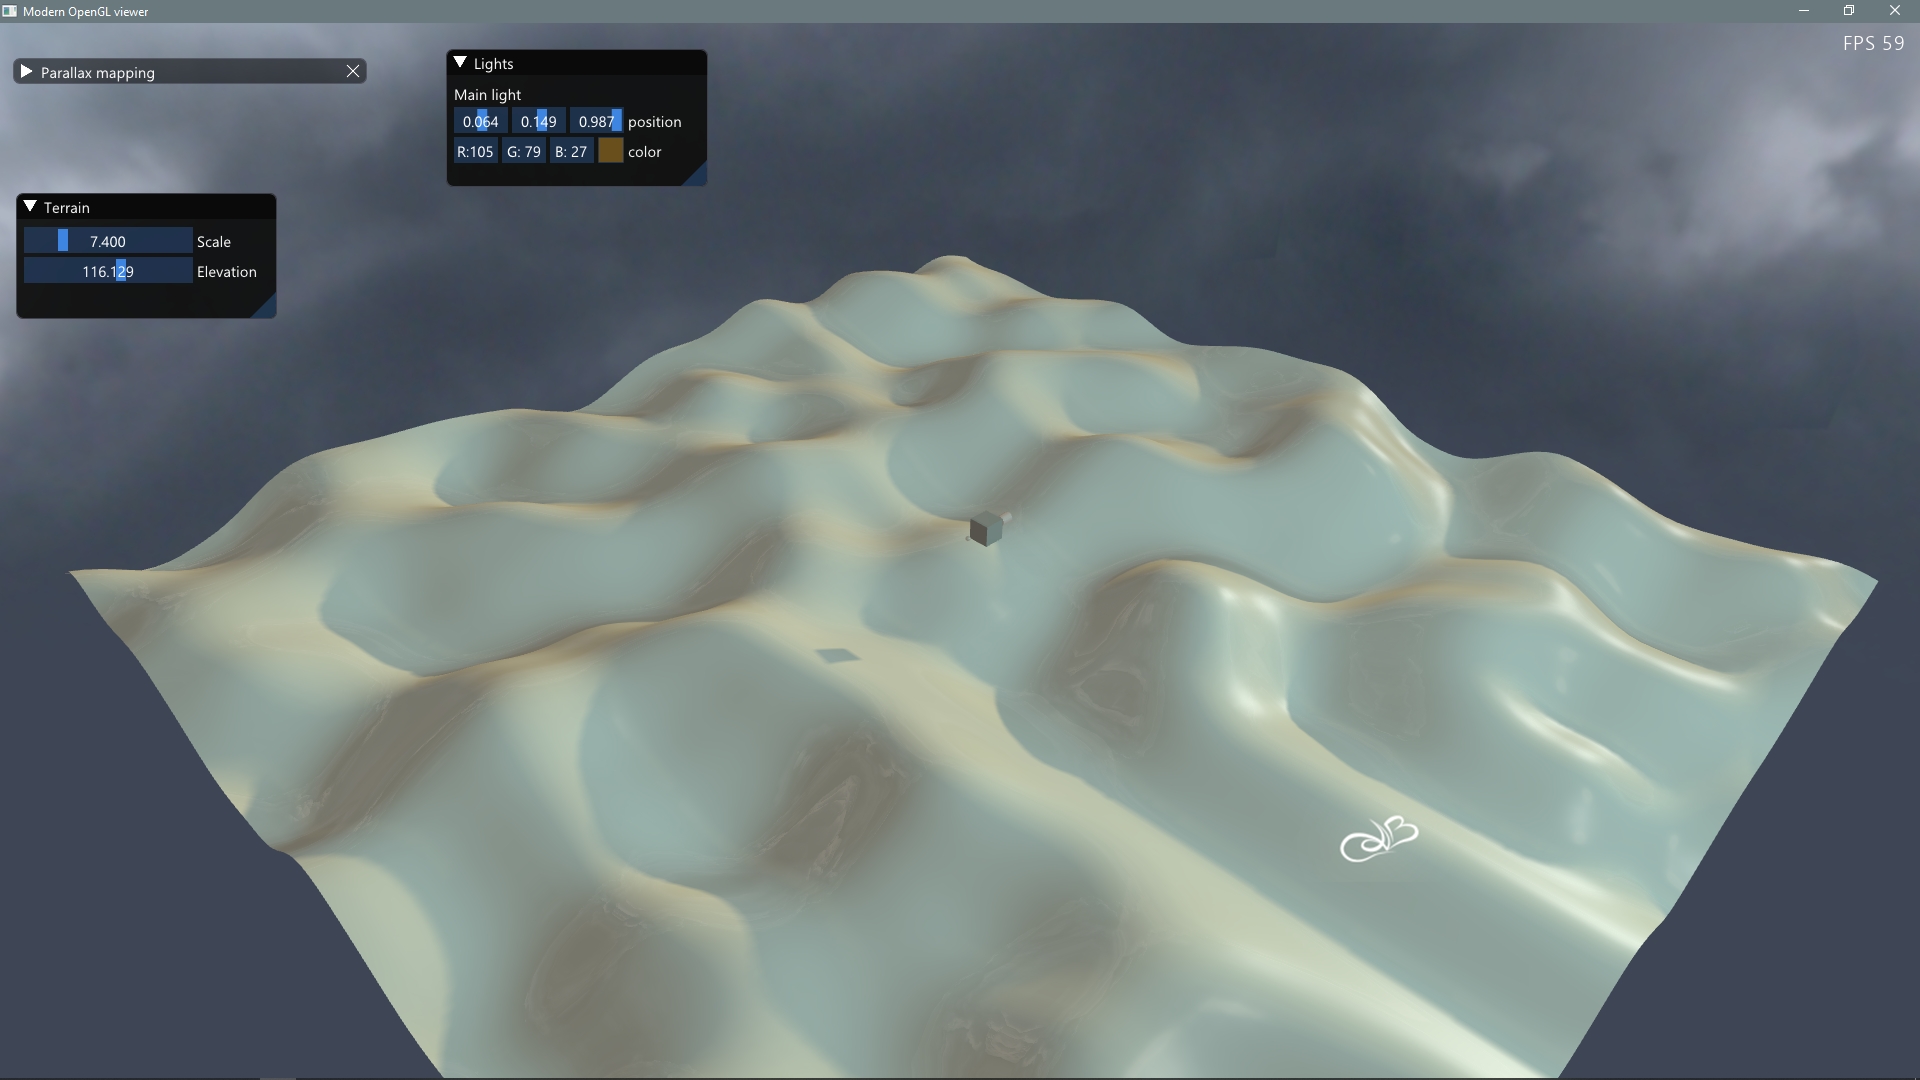 procedural terrain v0.0 - it all started from here